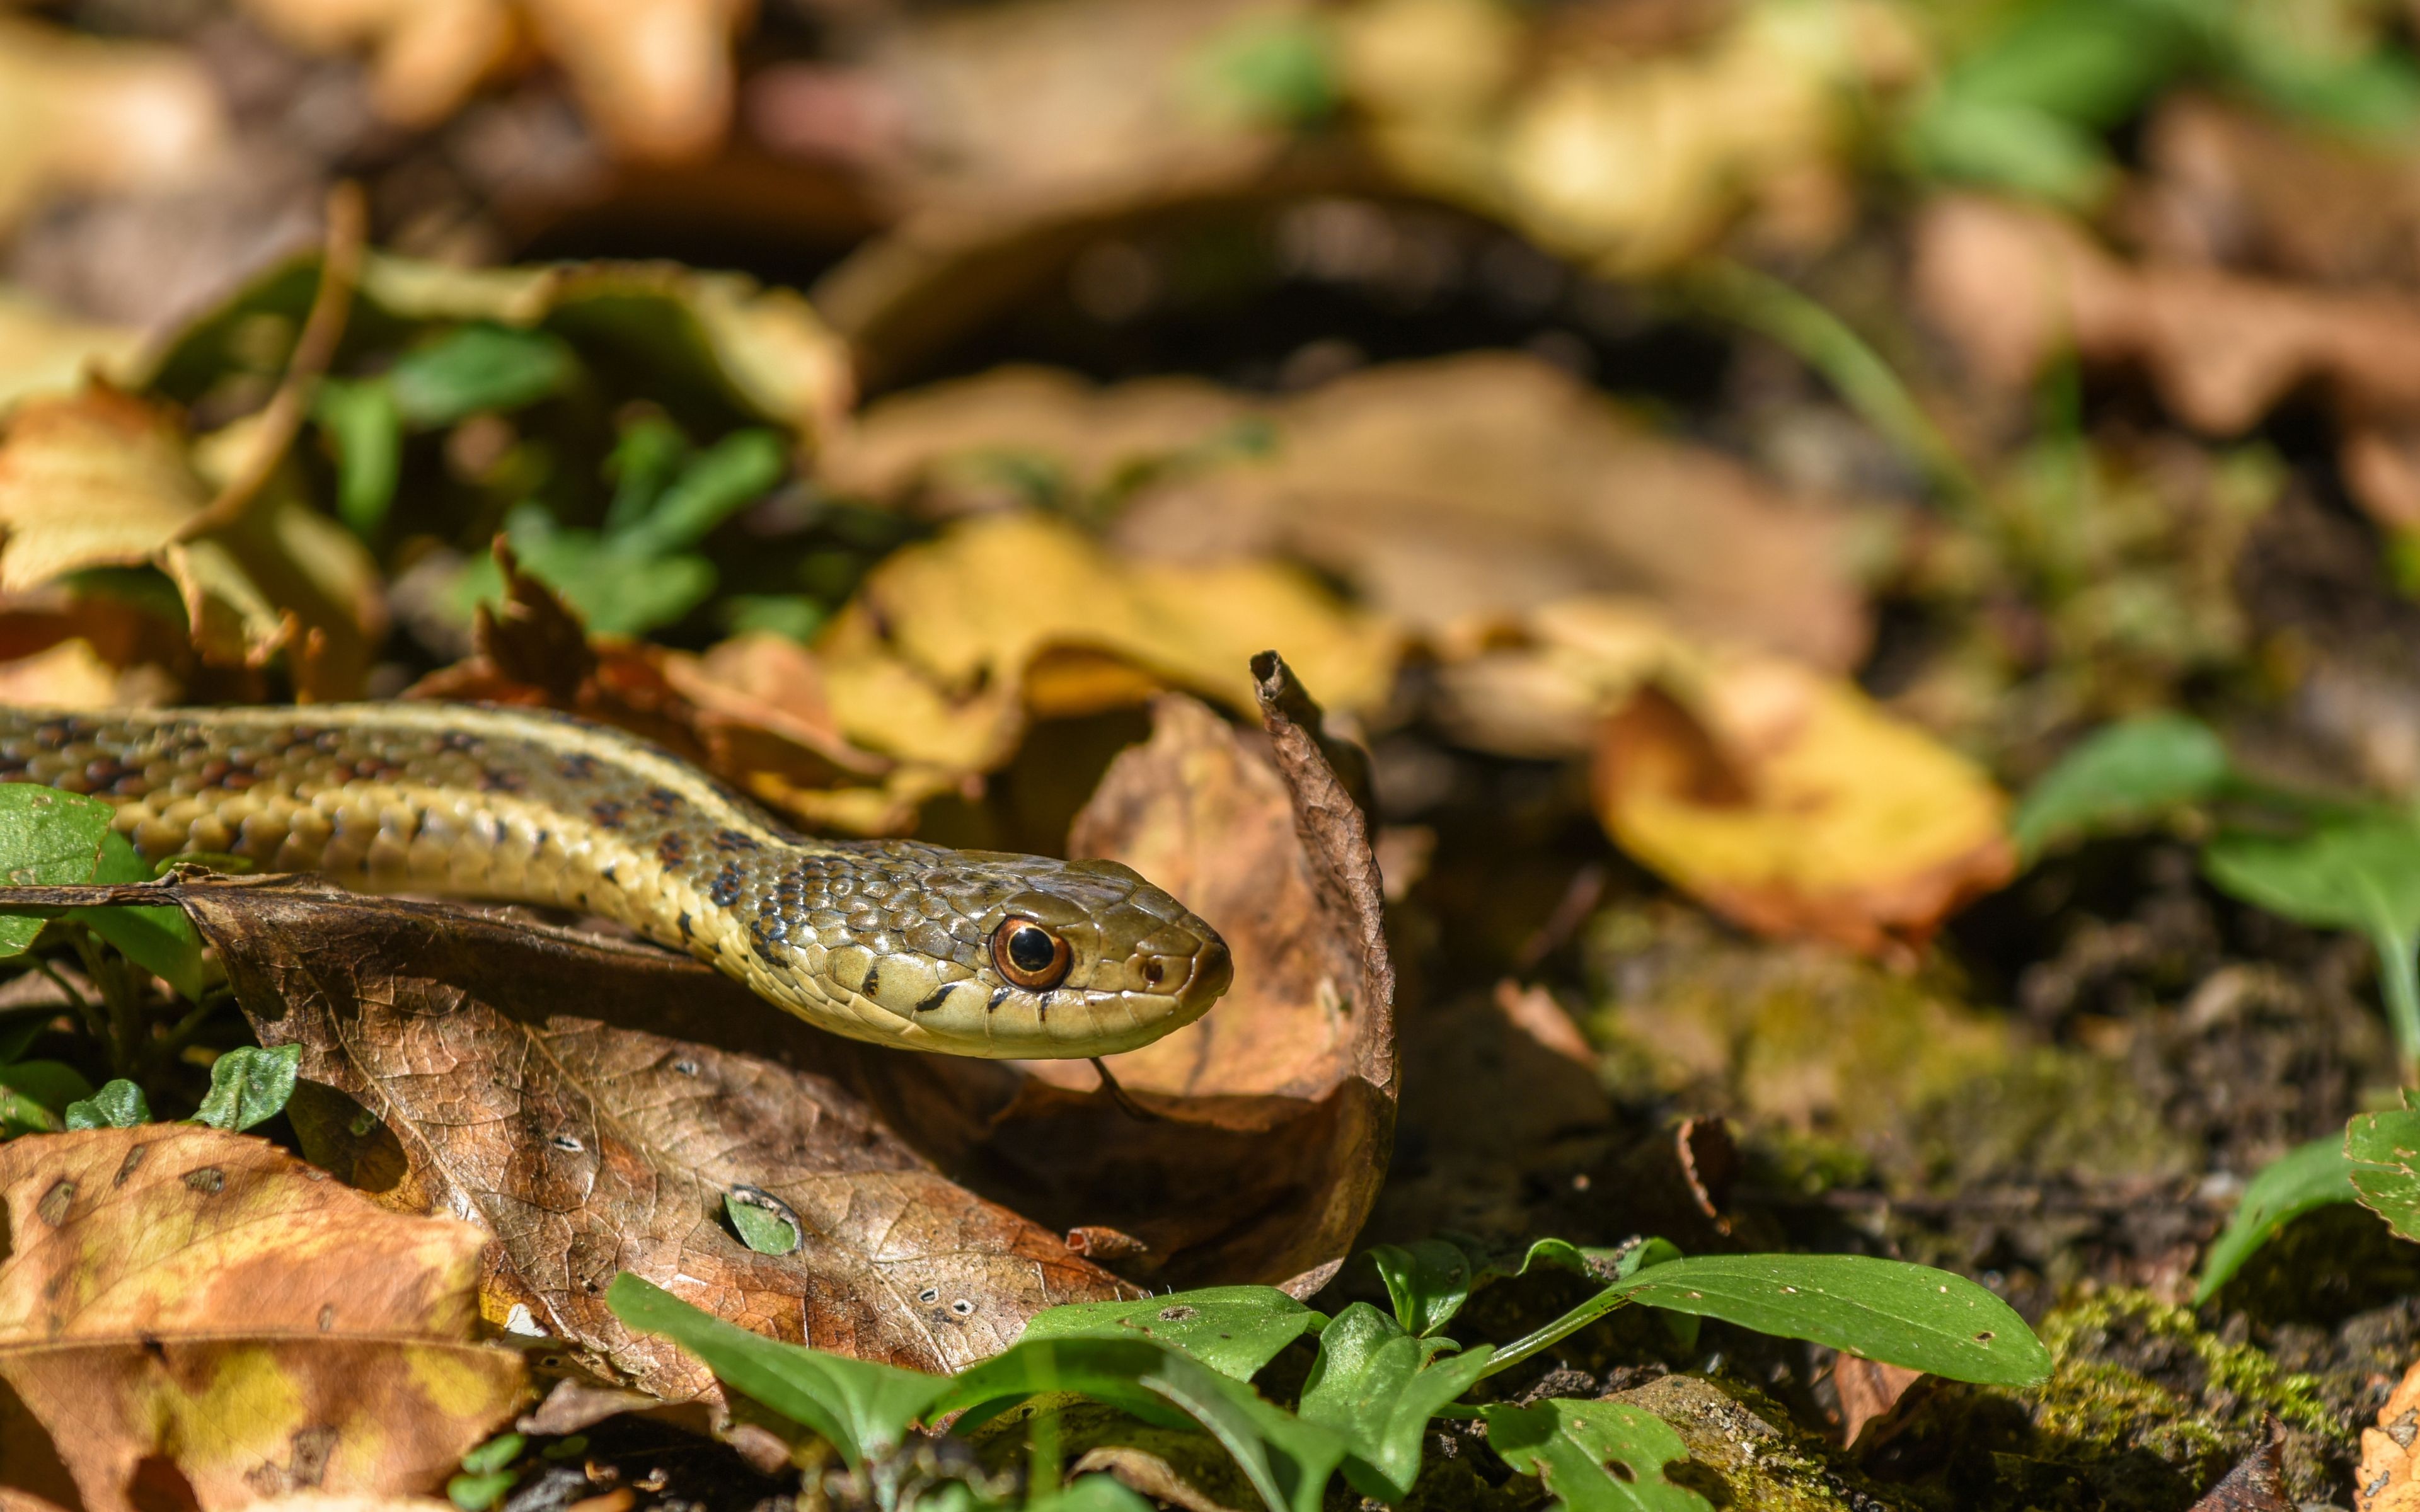 A snake slithers in the grass.